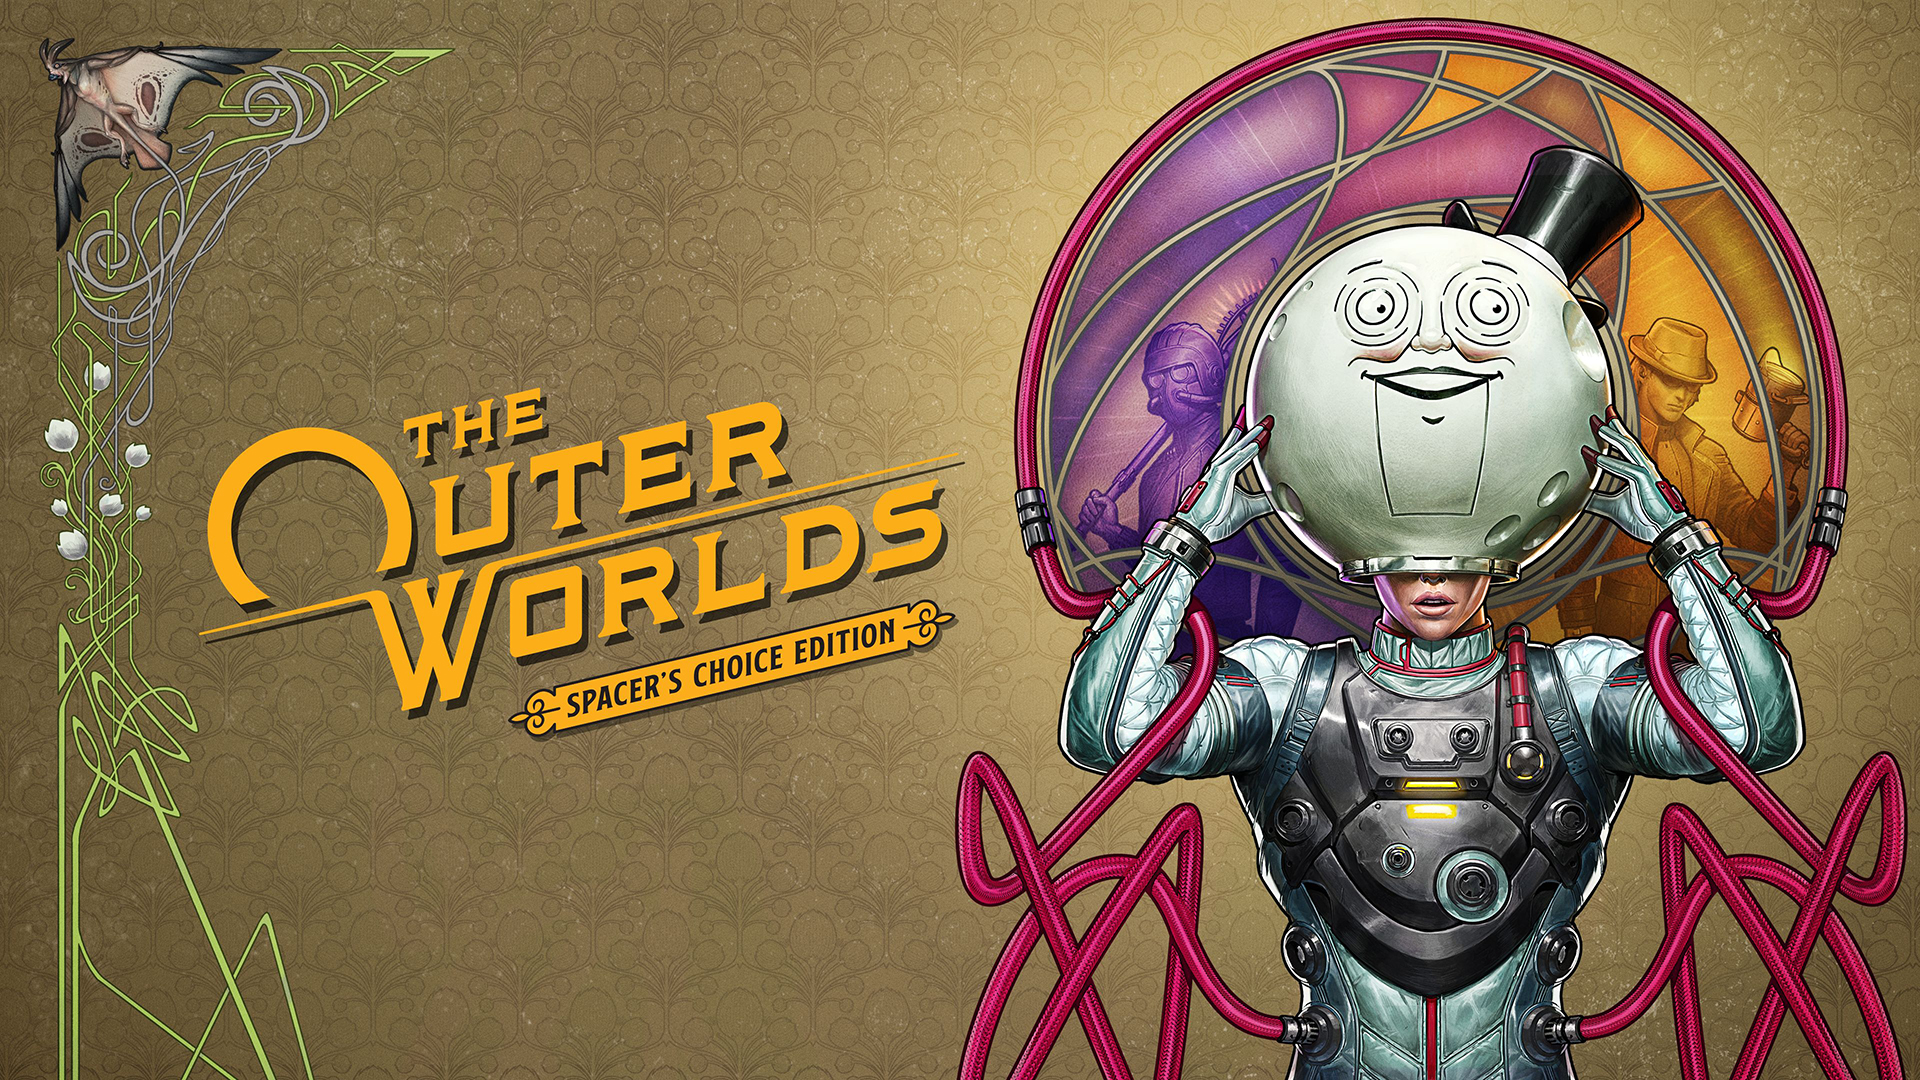 The Outer Worlds: Spacer's Choice Edition Is Much More Than Just a Visual Upgrade